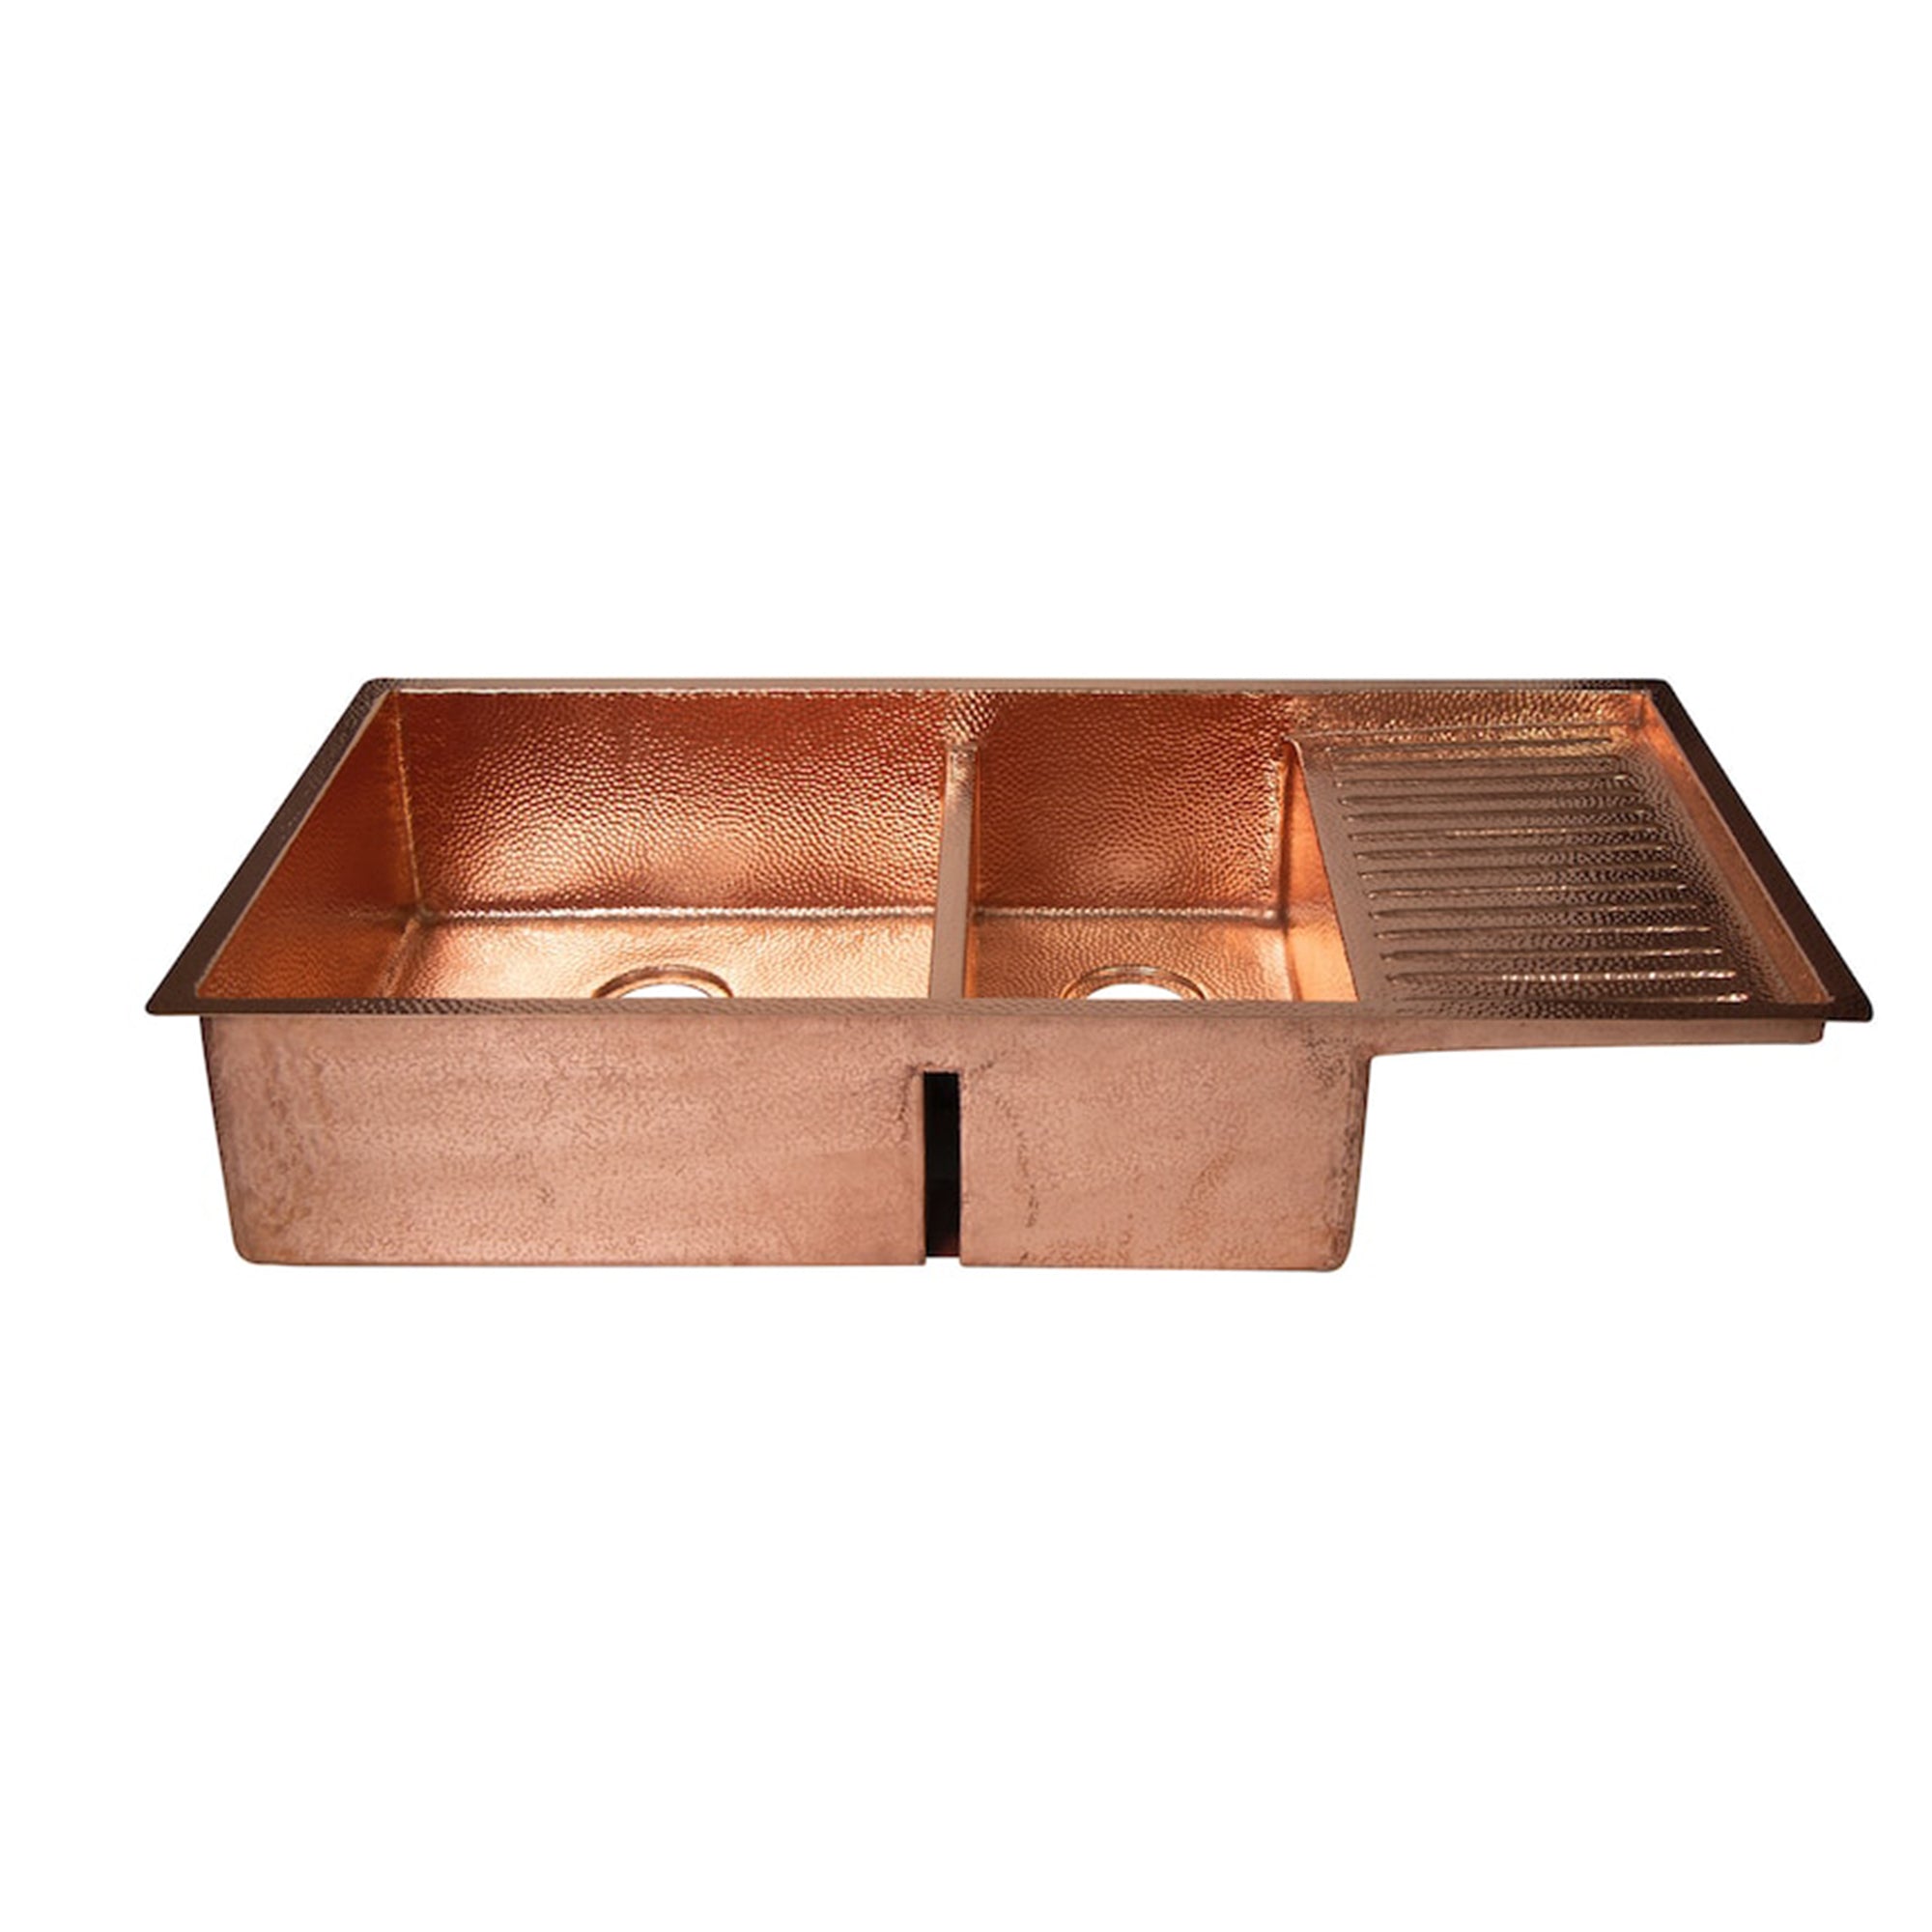 Drop-In Double Bowl Copper Kitchen Sink With Wringer-Vexa - Zayian